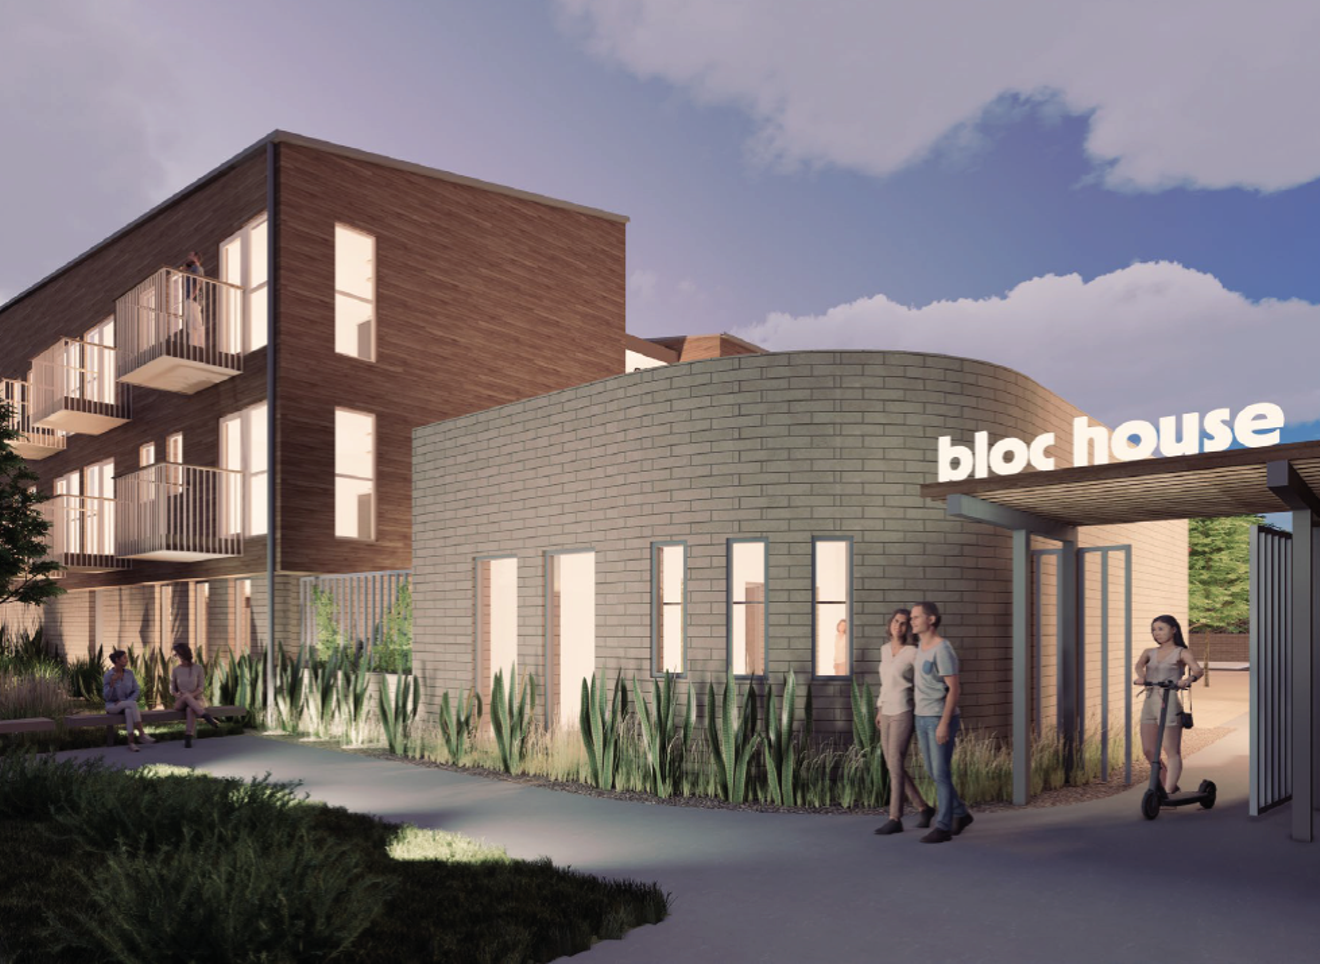 https://media2.dallasobserver.com/dal/imager/are-micro-apartments-the-solution-to-dallas-rent-rate-woes-a-new-complex-hopes-so/u/magnum/17879428/block_house_madison_partners.png?cb=1701191684